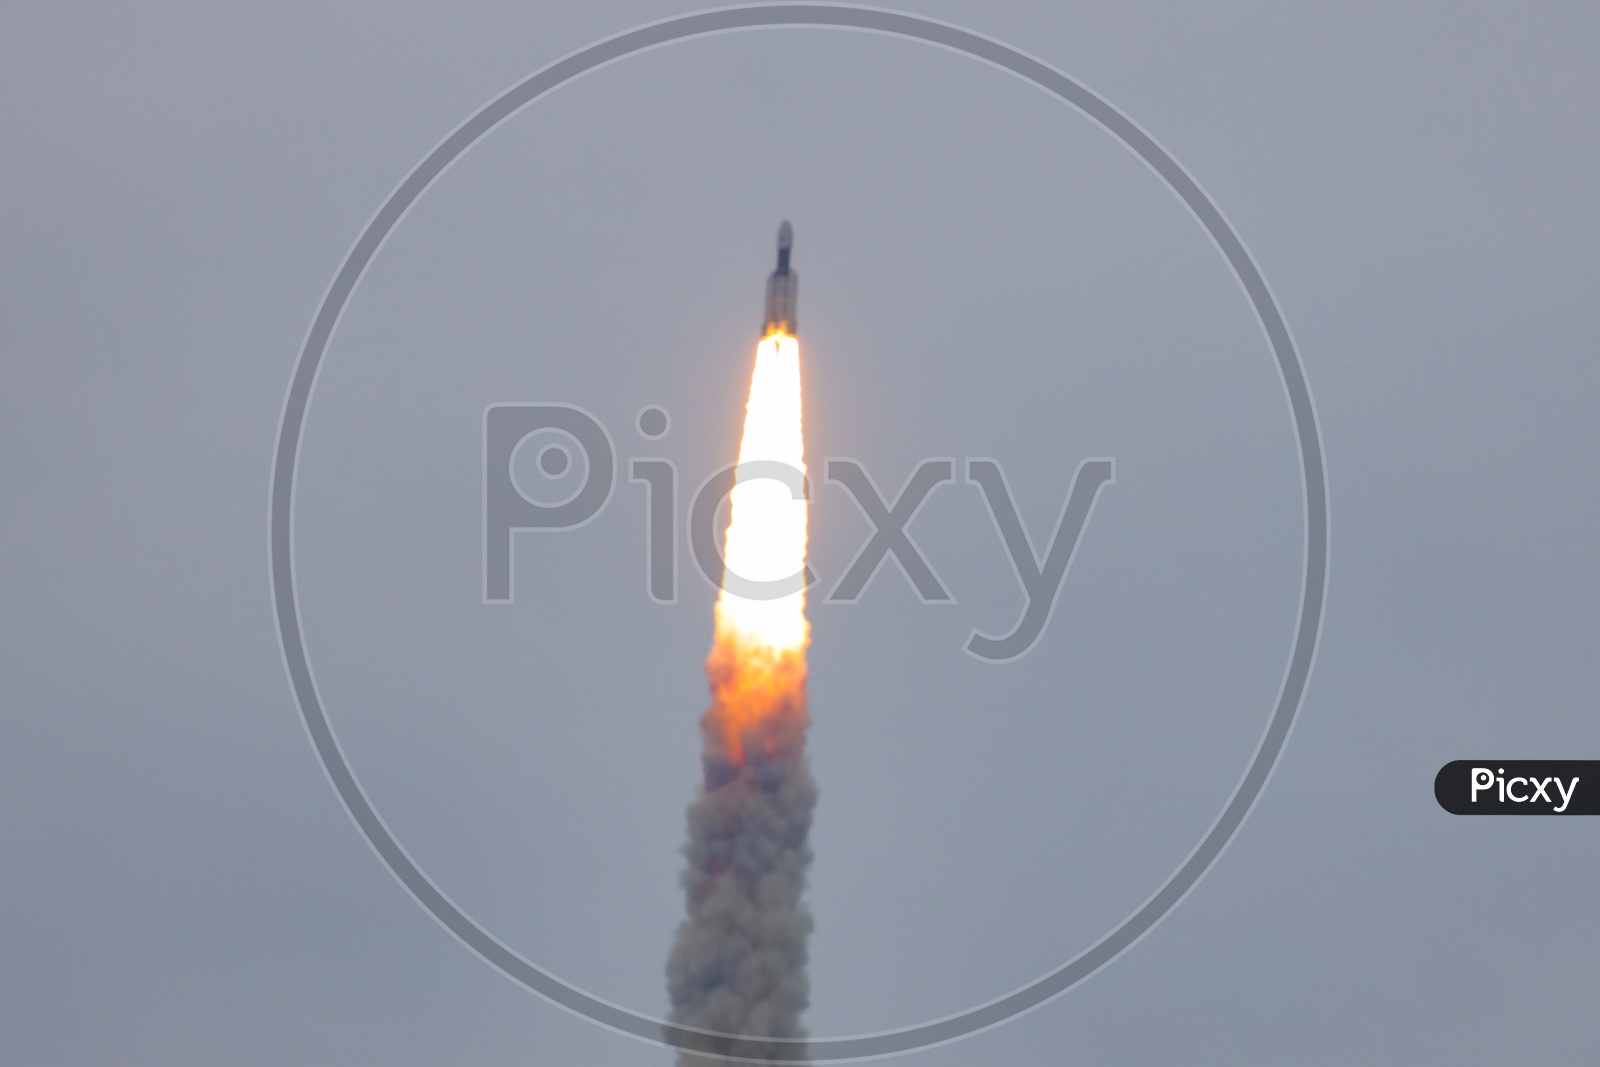 GSLV- Mk  III - M1 or Chandrayaan -2  Spacecraft or Launch Vehicle  Taking Off From Launch Pad In Sriharikota